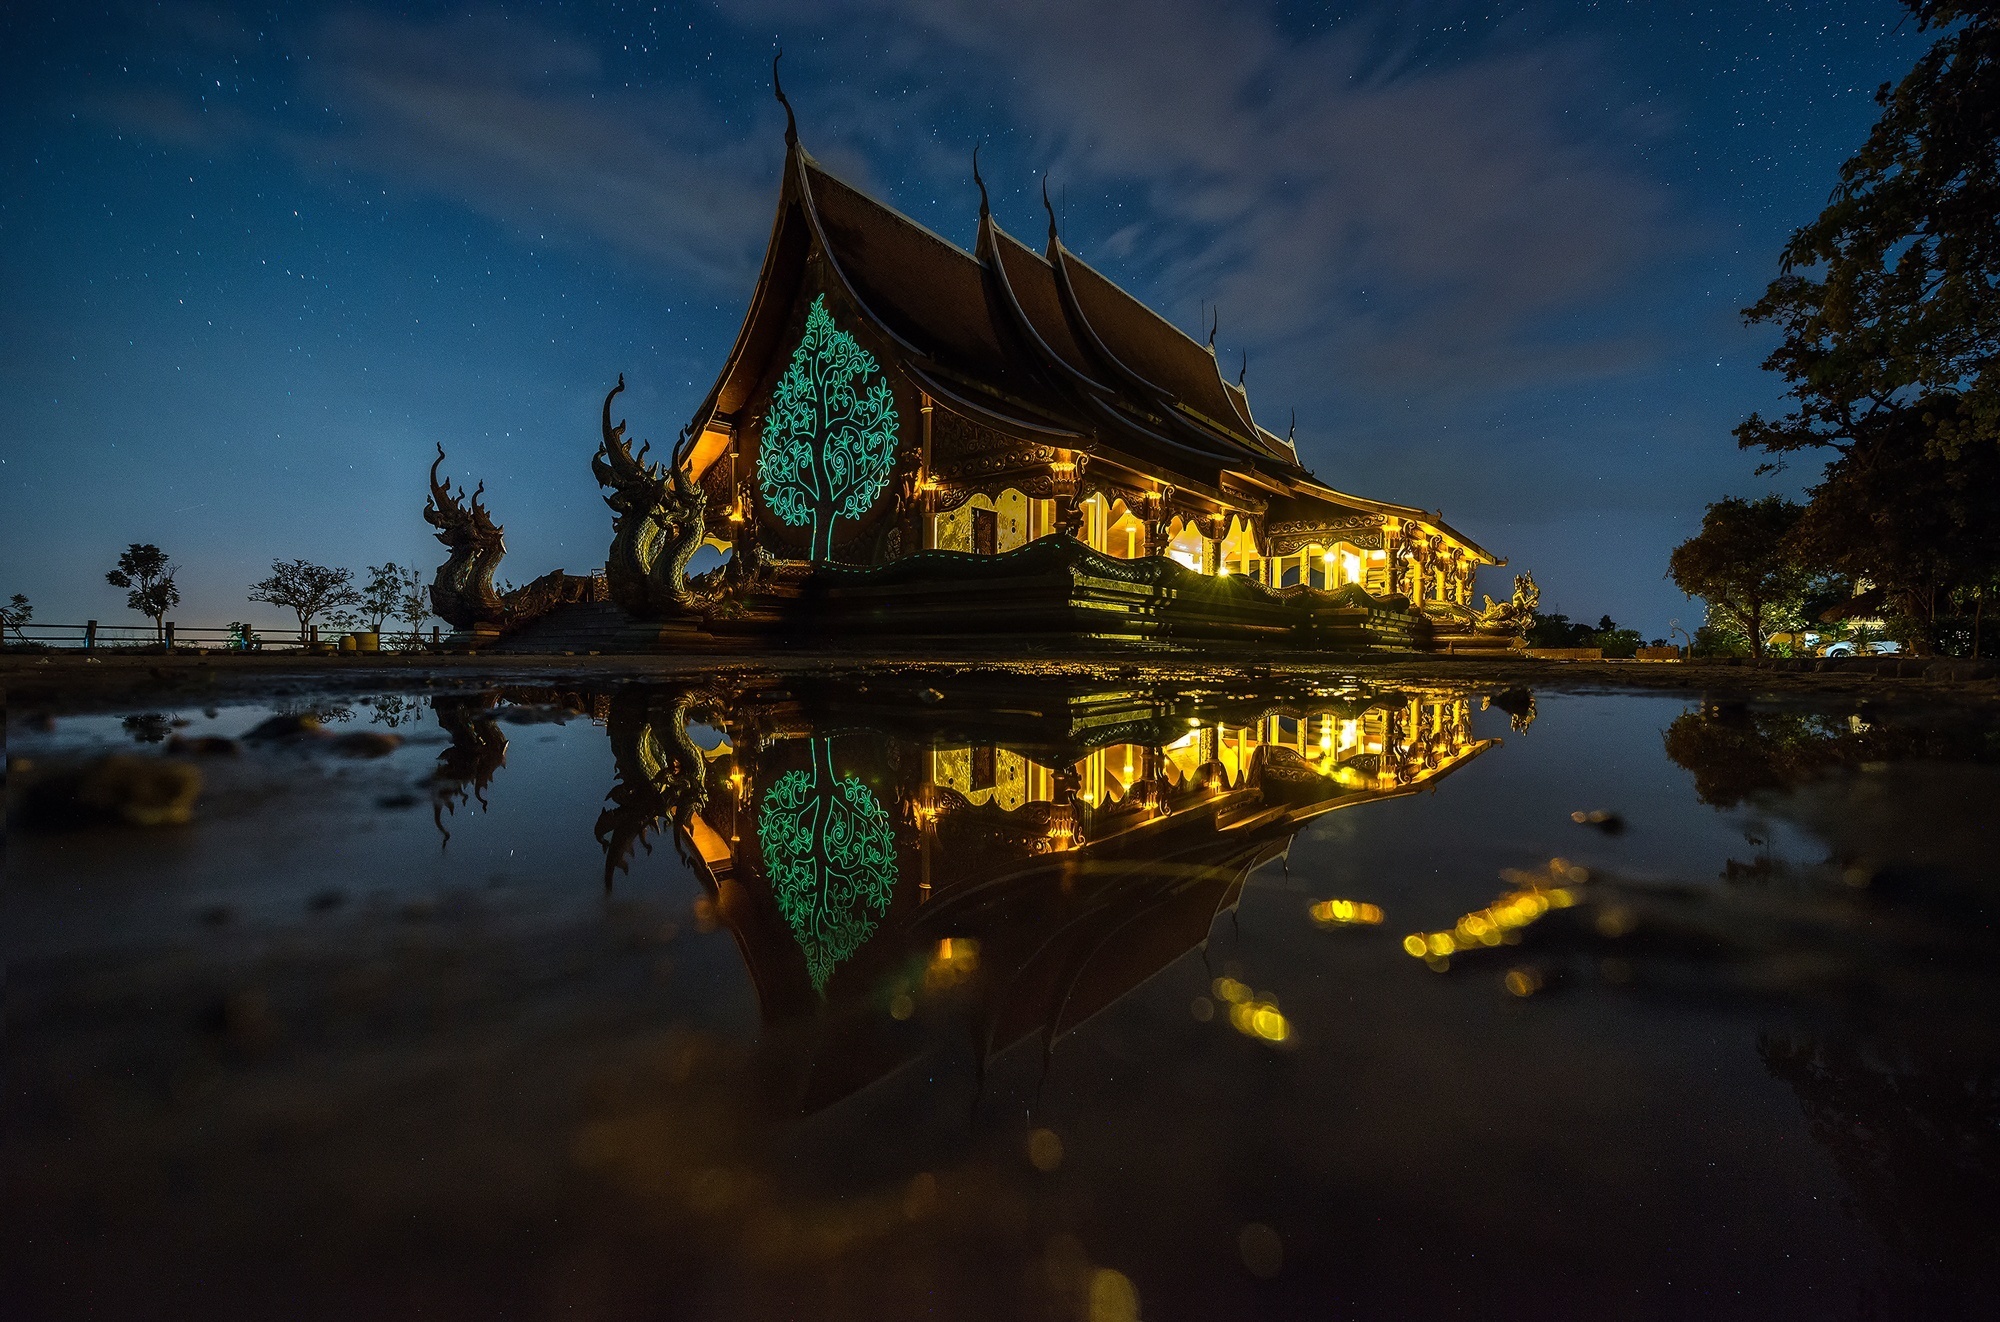 The Temple of Truth by Sarawut Intarob